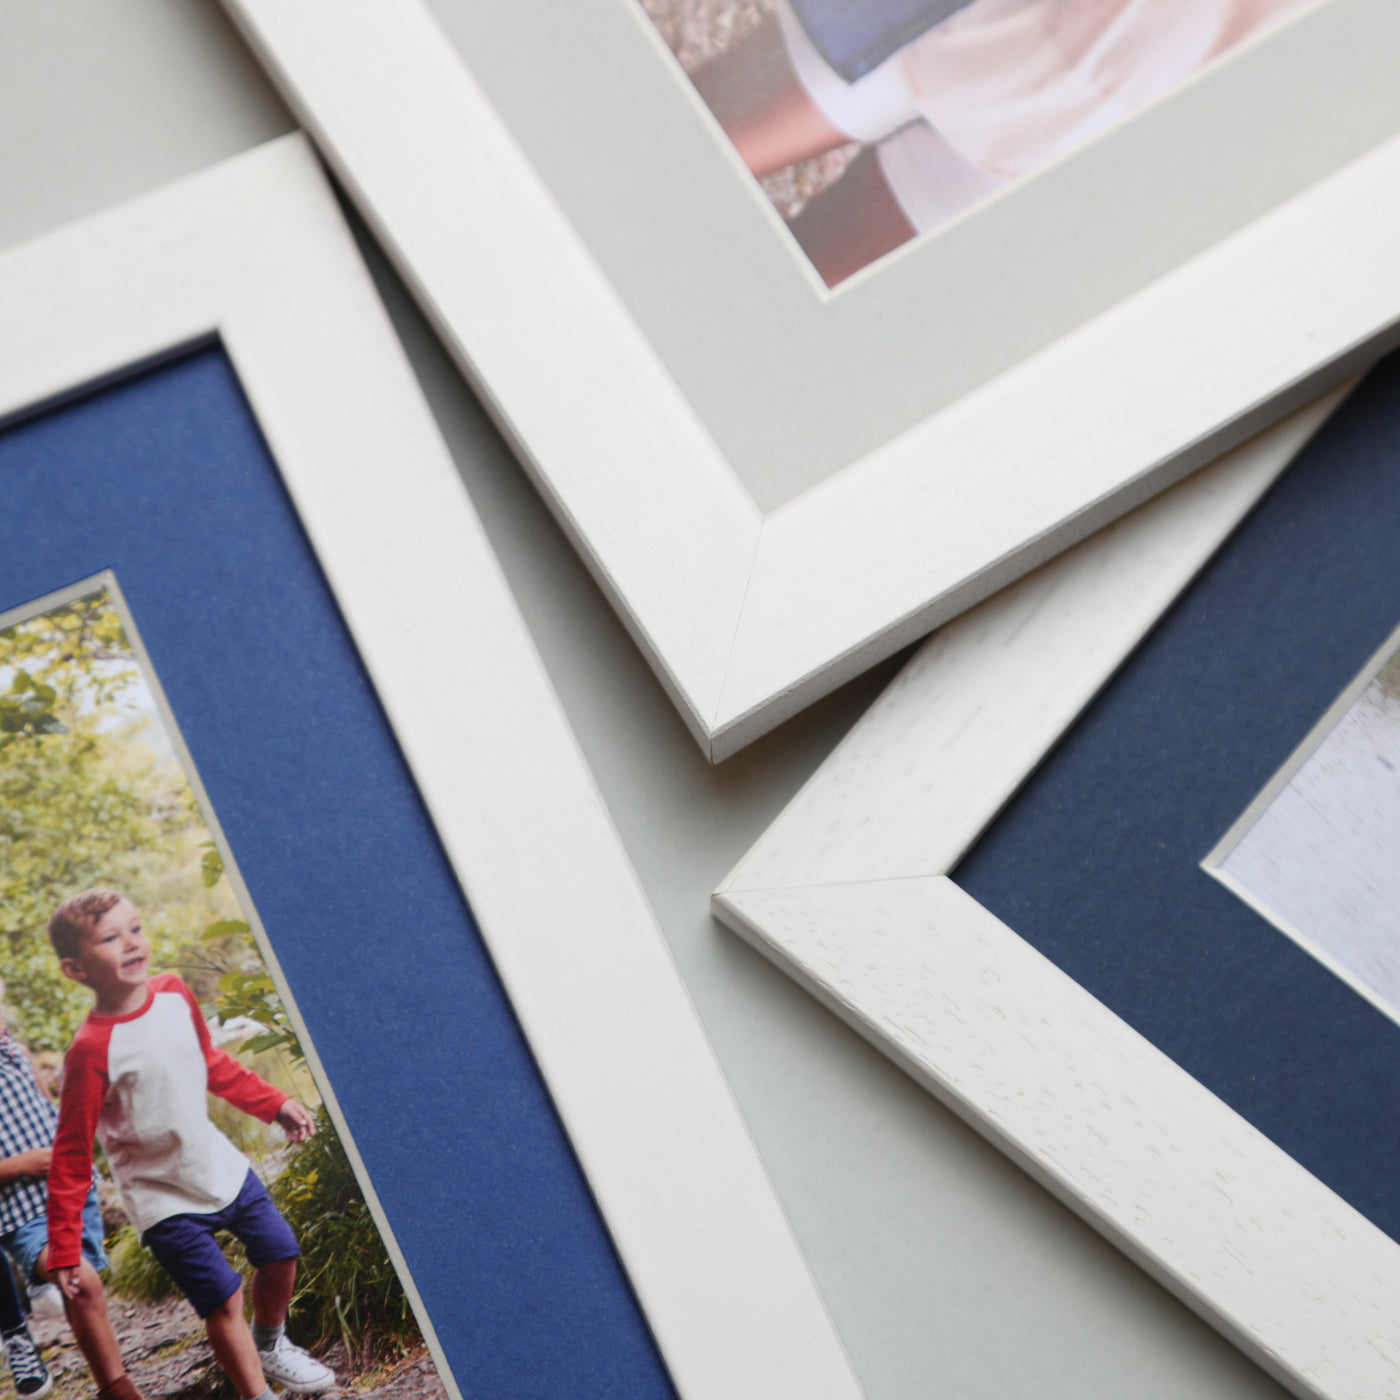 40x30cm Classic White Picture Frame with 30x20cm Mount